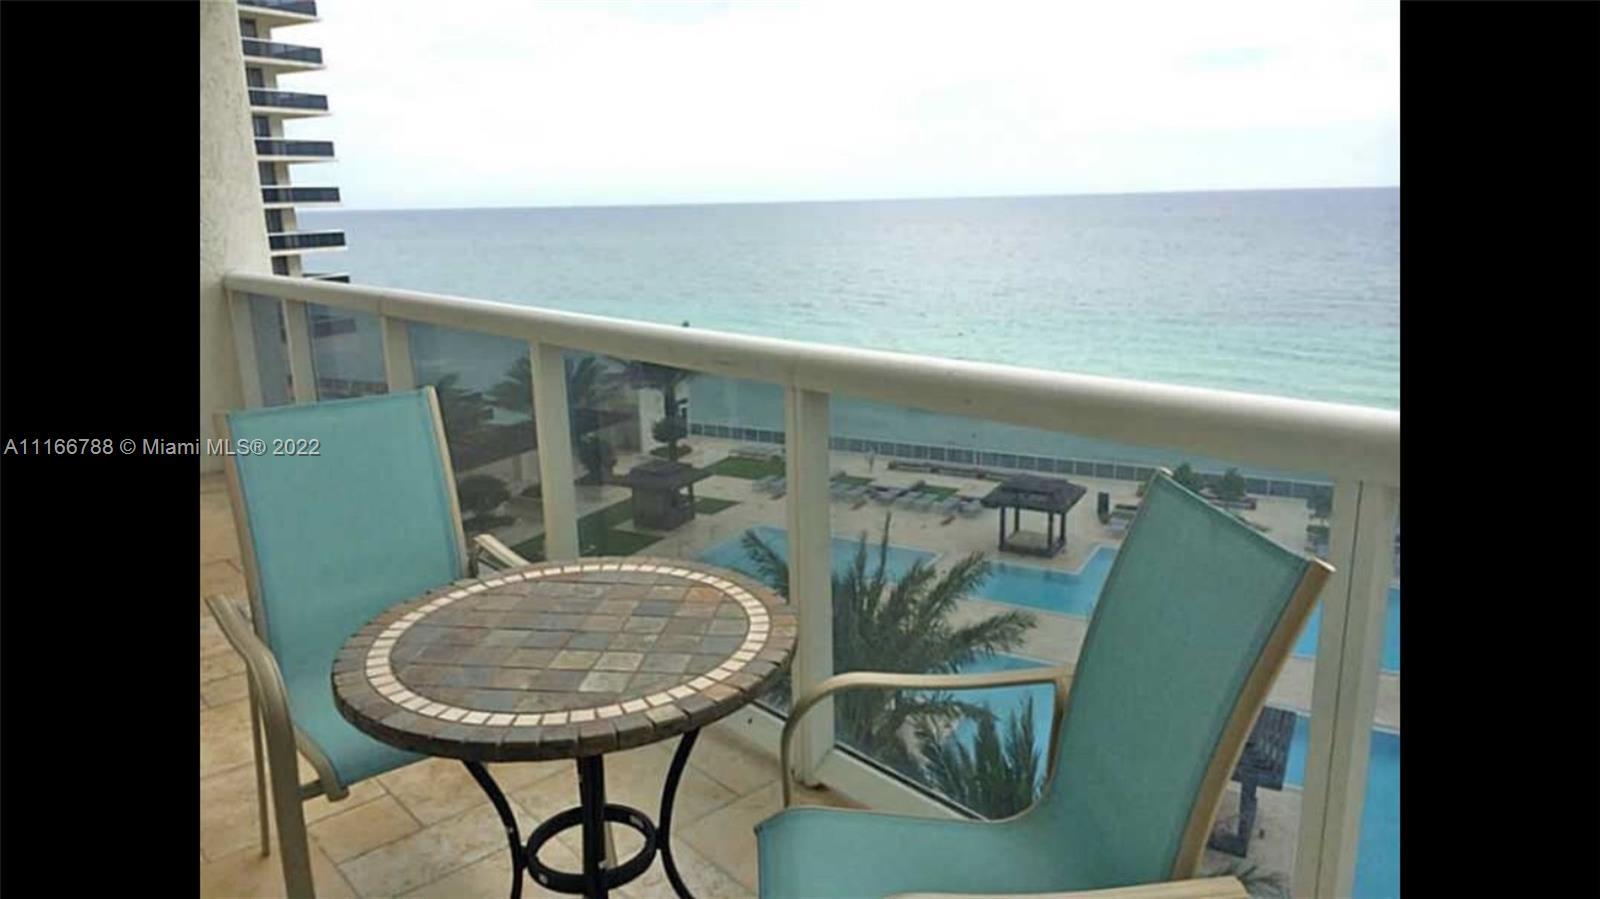 ONE OF A KIND DIRECT OCEANFRONT UNIT!!! WHAT AN AMAZING OPPORTUNITY TO OWN A PIECE OF PARADISE IN TH